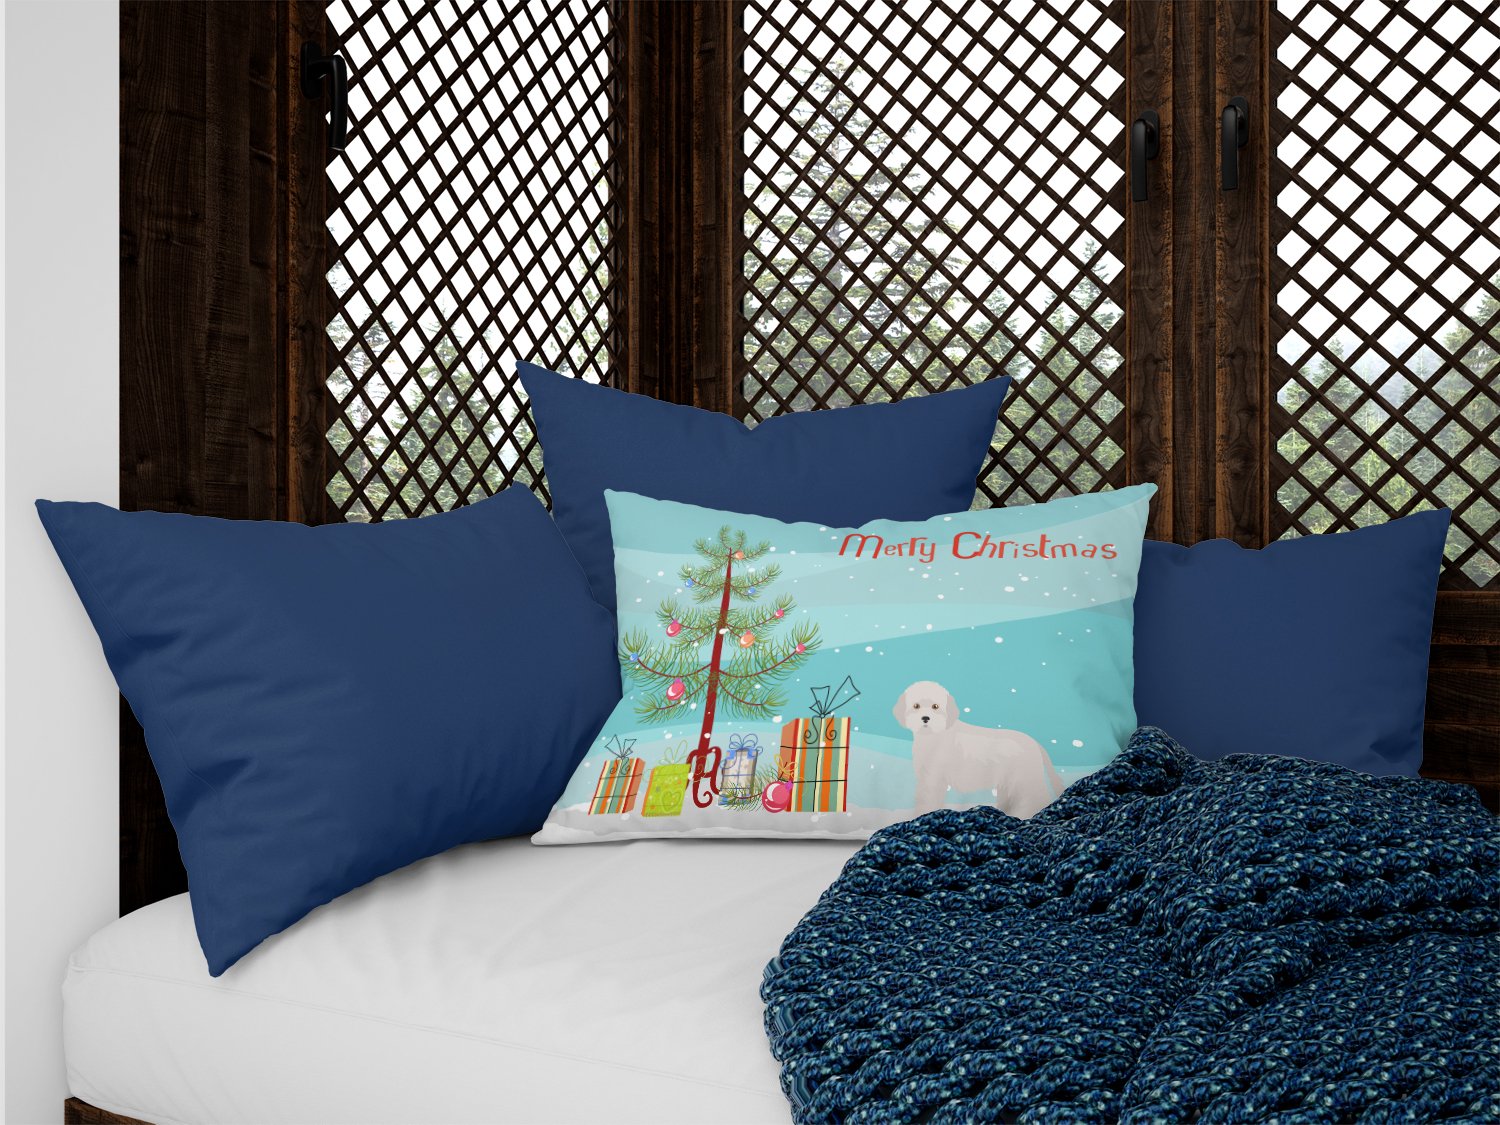 Cyprus Poodle Christmas Tree Canvas Fabric Decorative Pillow CK3449PW1216 by Caroline's Treasures